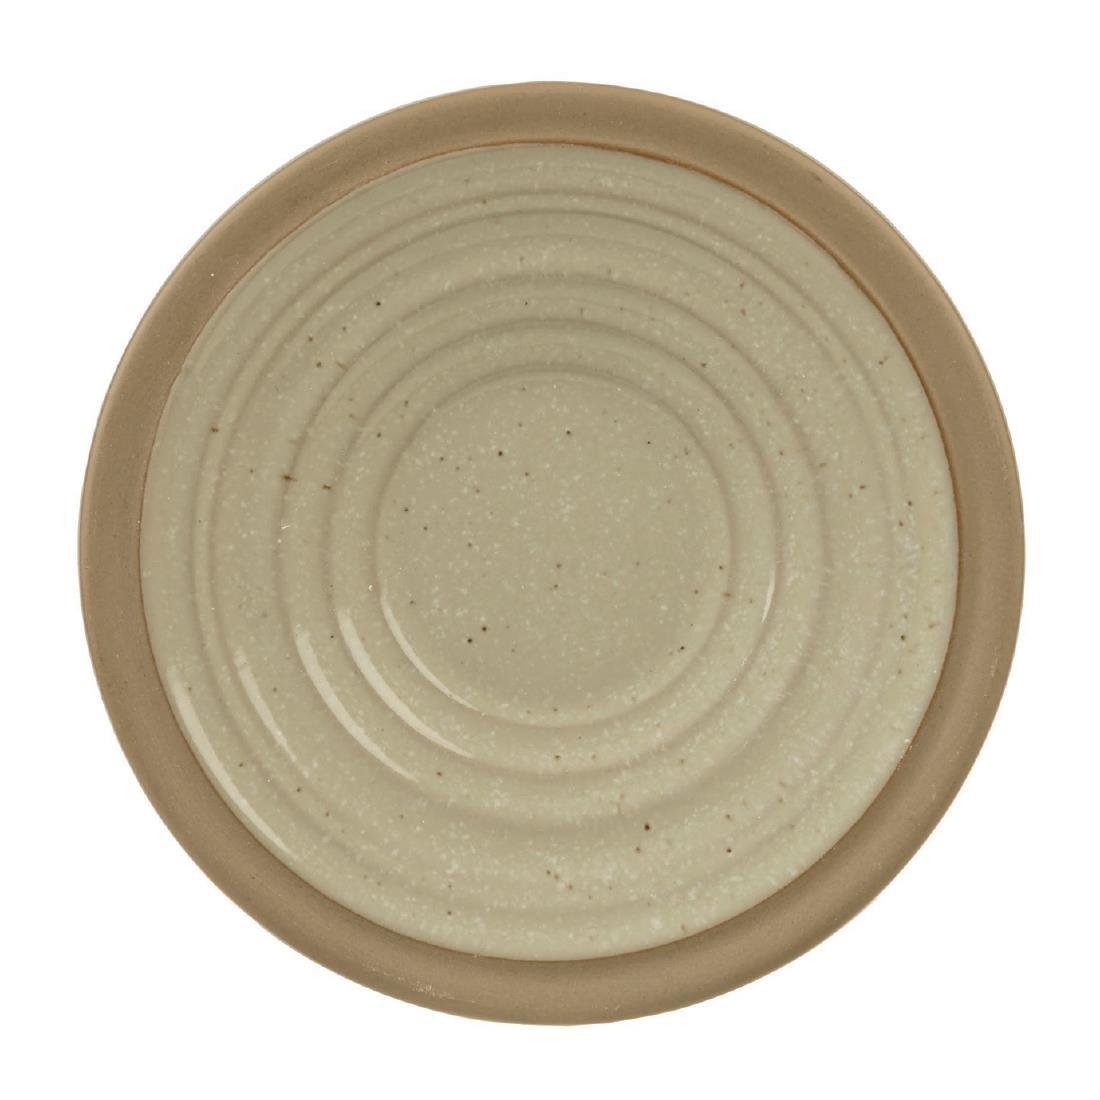 Churchill Igneous Stoneware Espresso Saucers 135mm (Pack of 6) - DY150  - 1